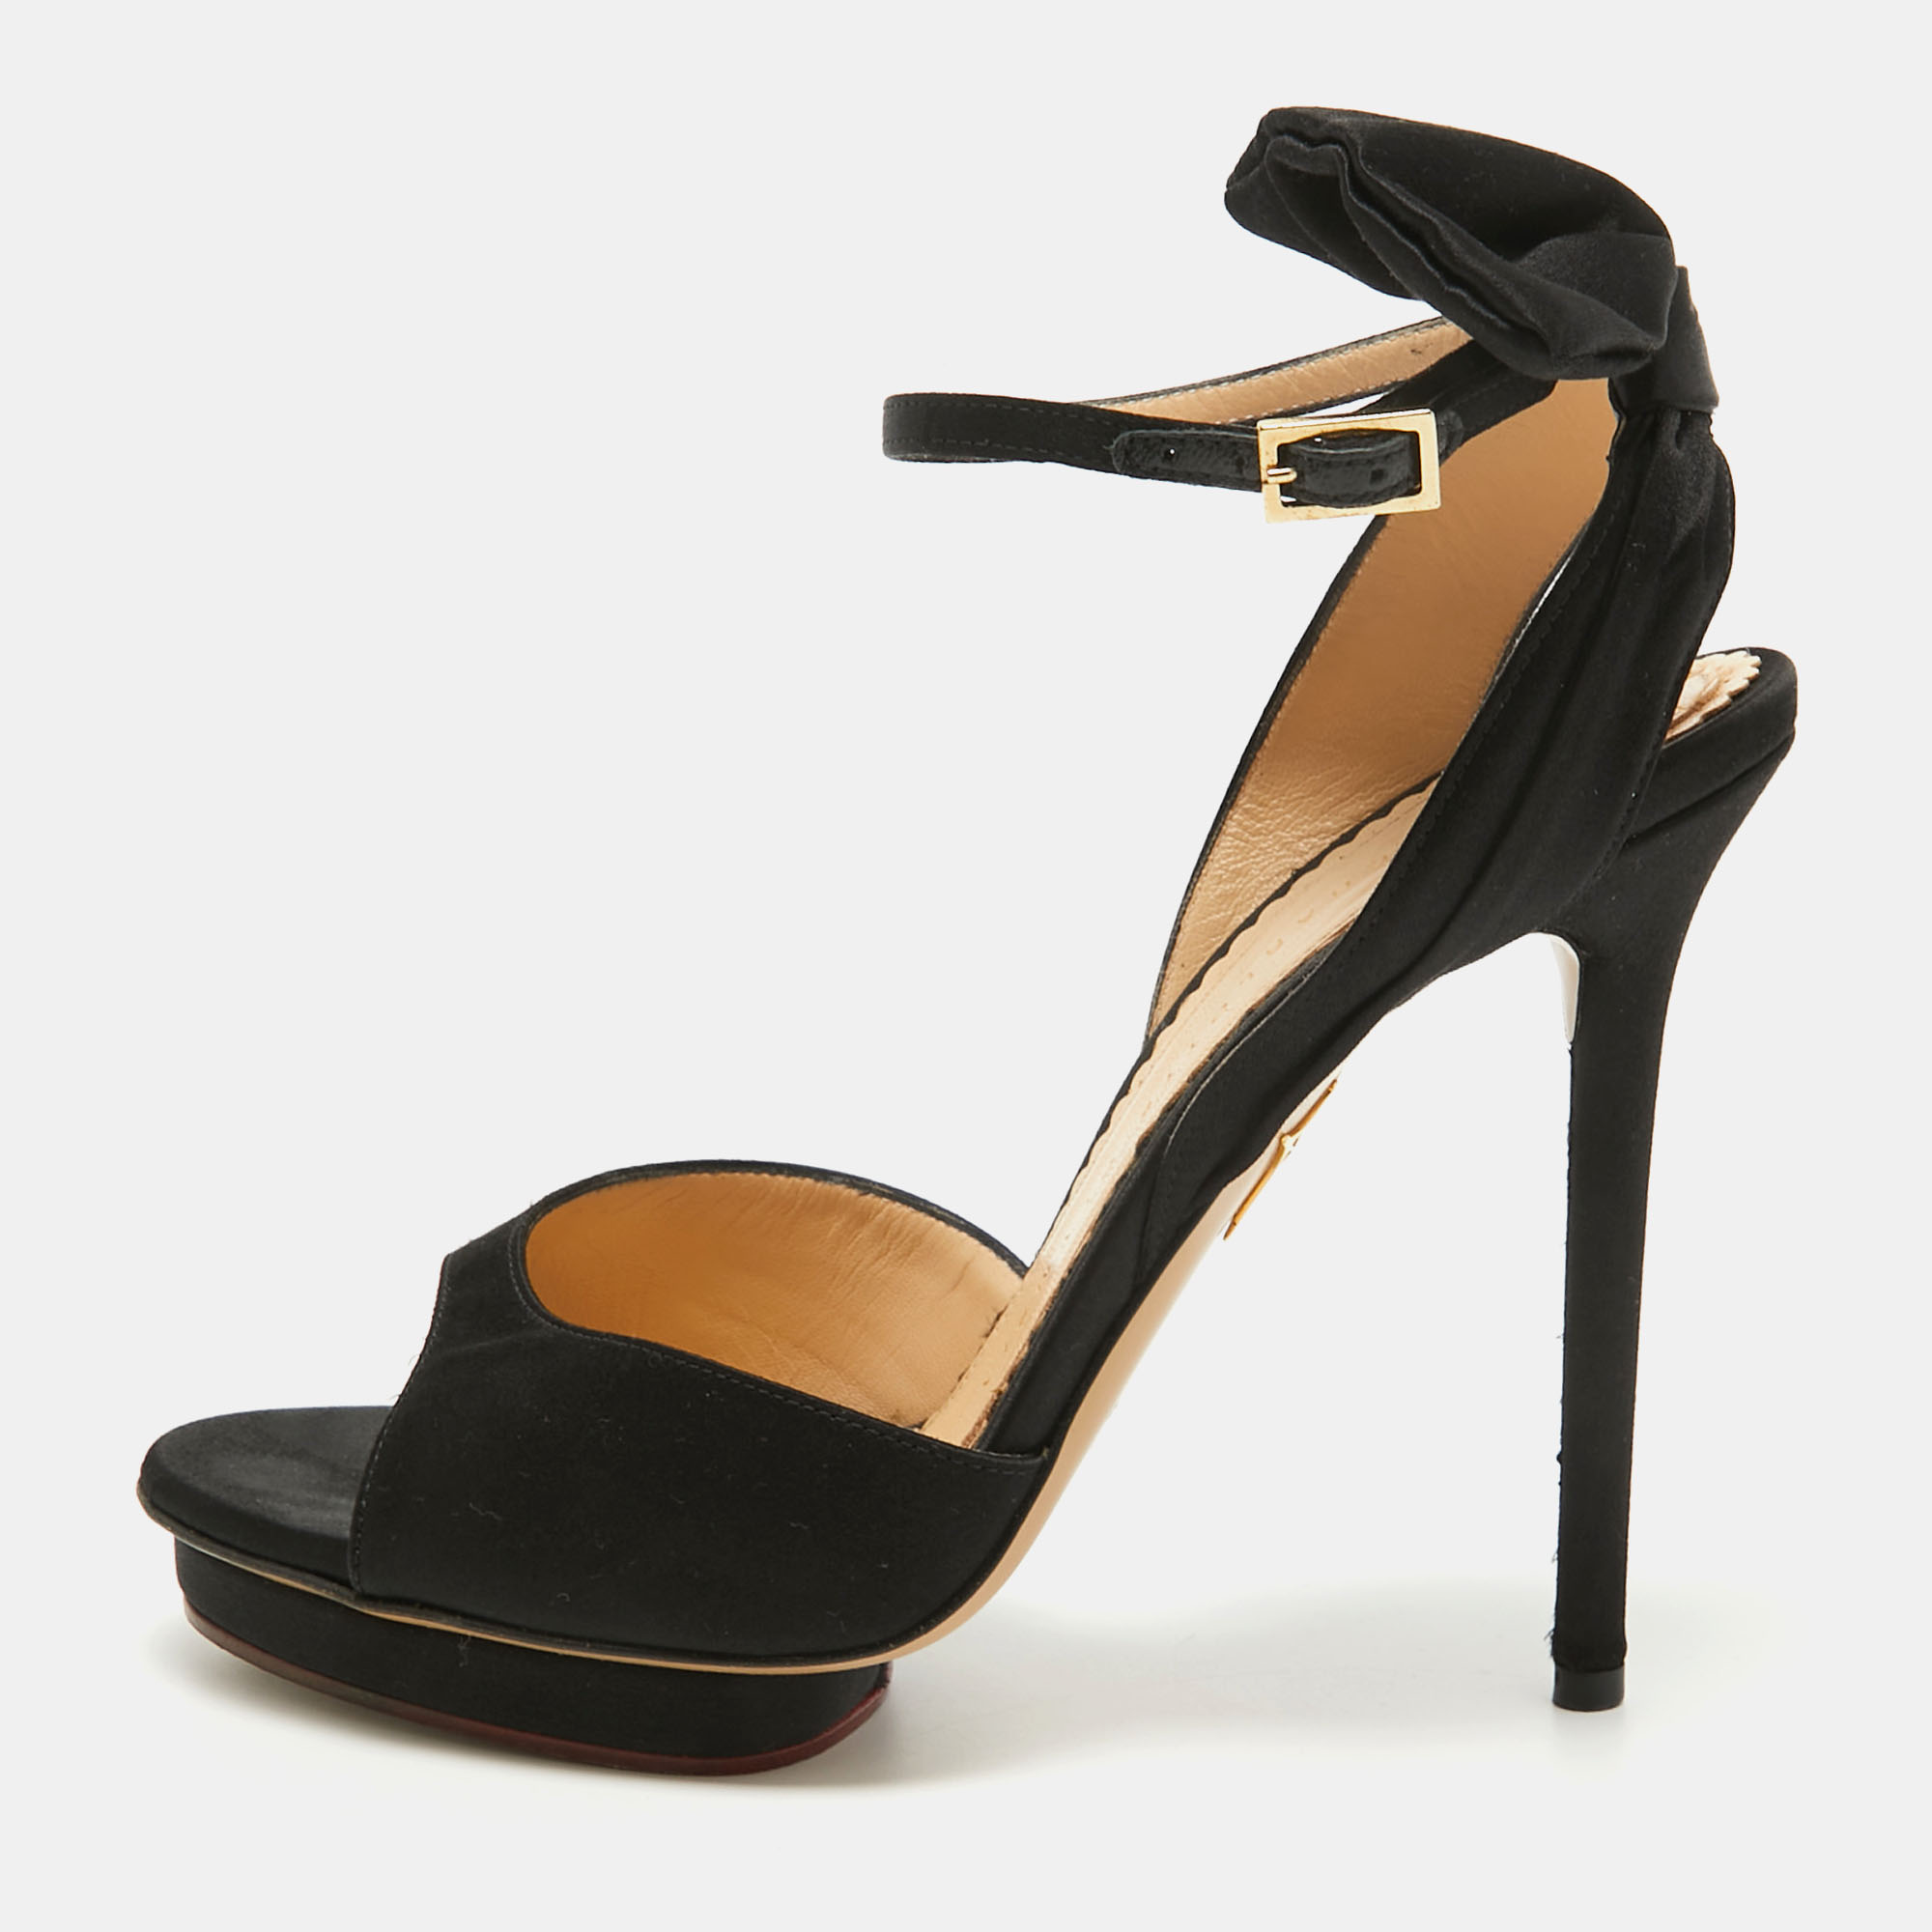 Charlotte olympia black satin wallace sandals size 38